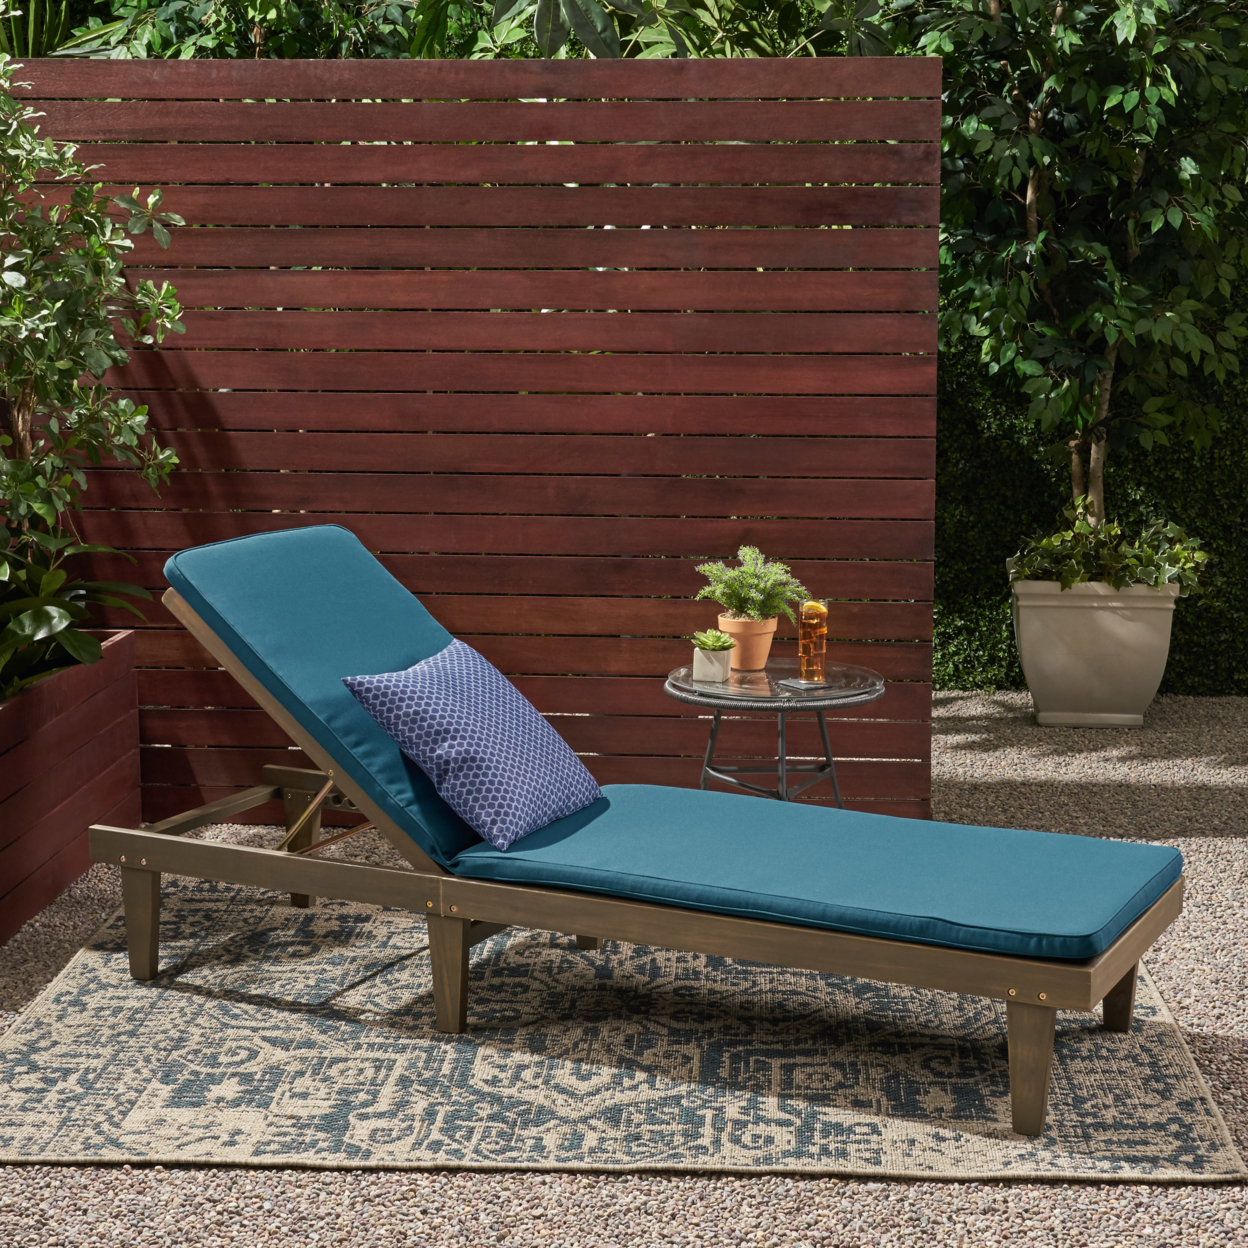 Yvette Outdoor Acacia Wood Chaise Lounge And Cushion Set - Gray Finish + Blue